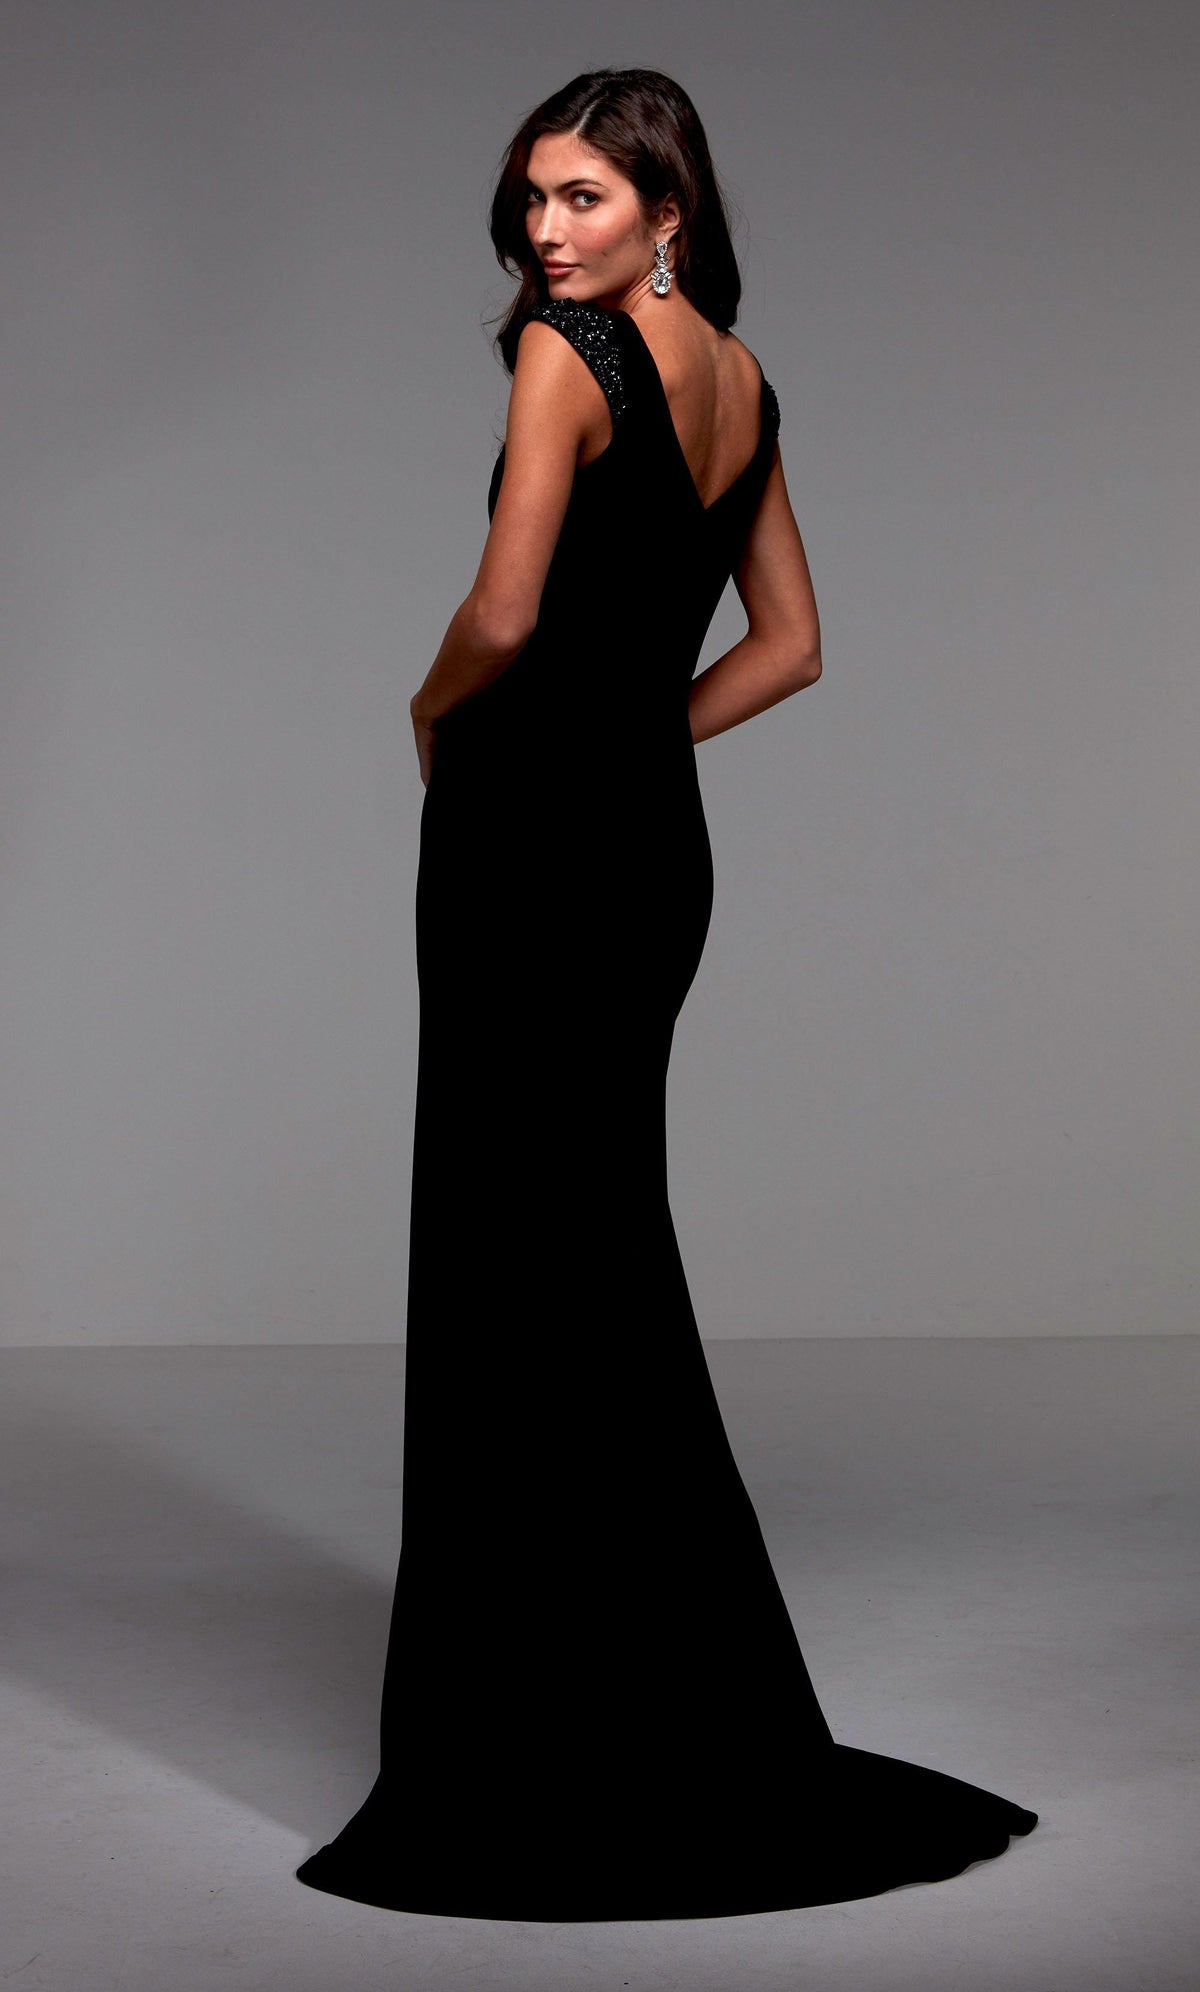 Black long evening dress with beaded capped sleeves, a V shaped back, and train